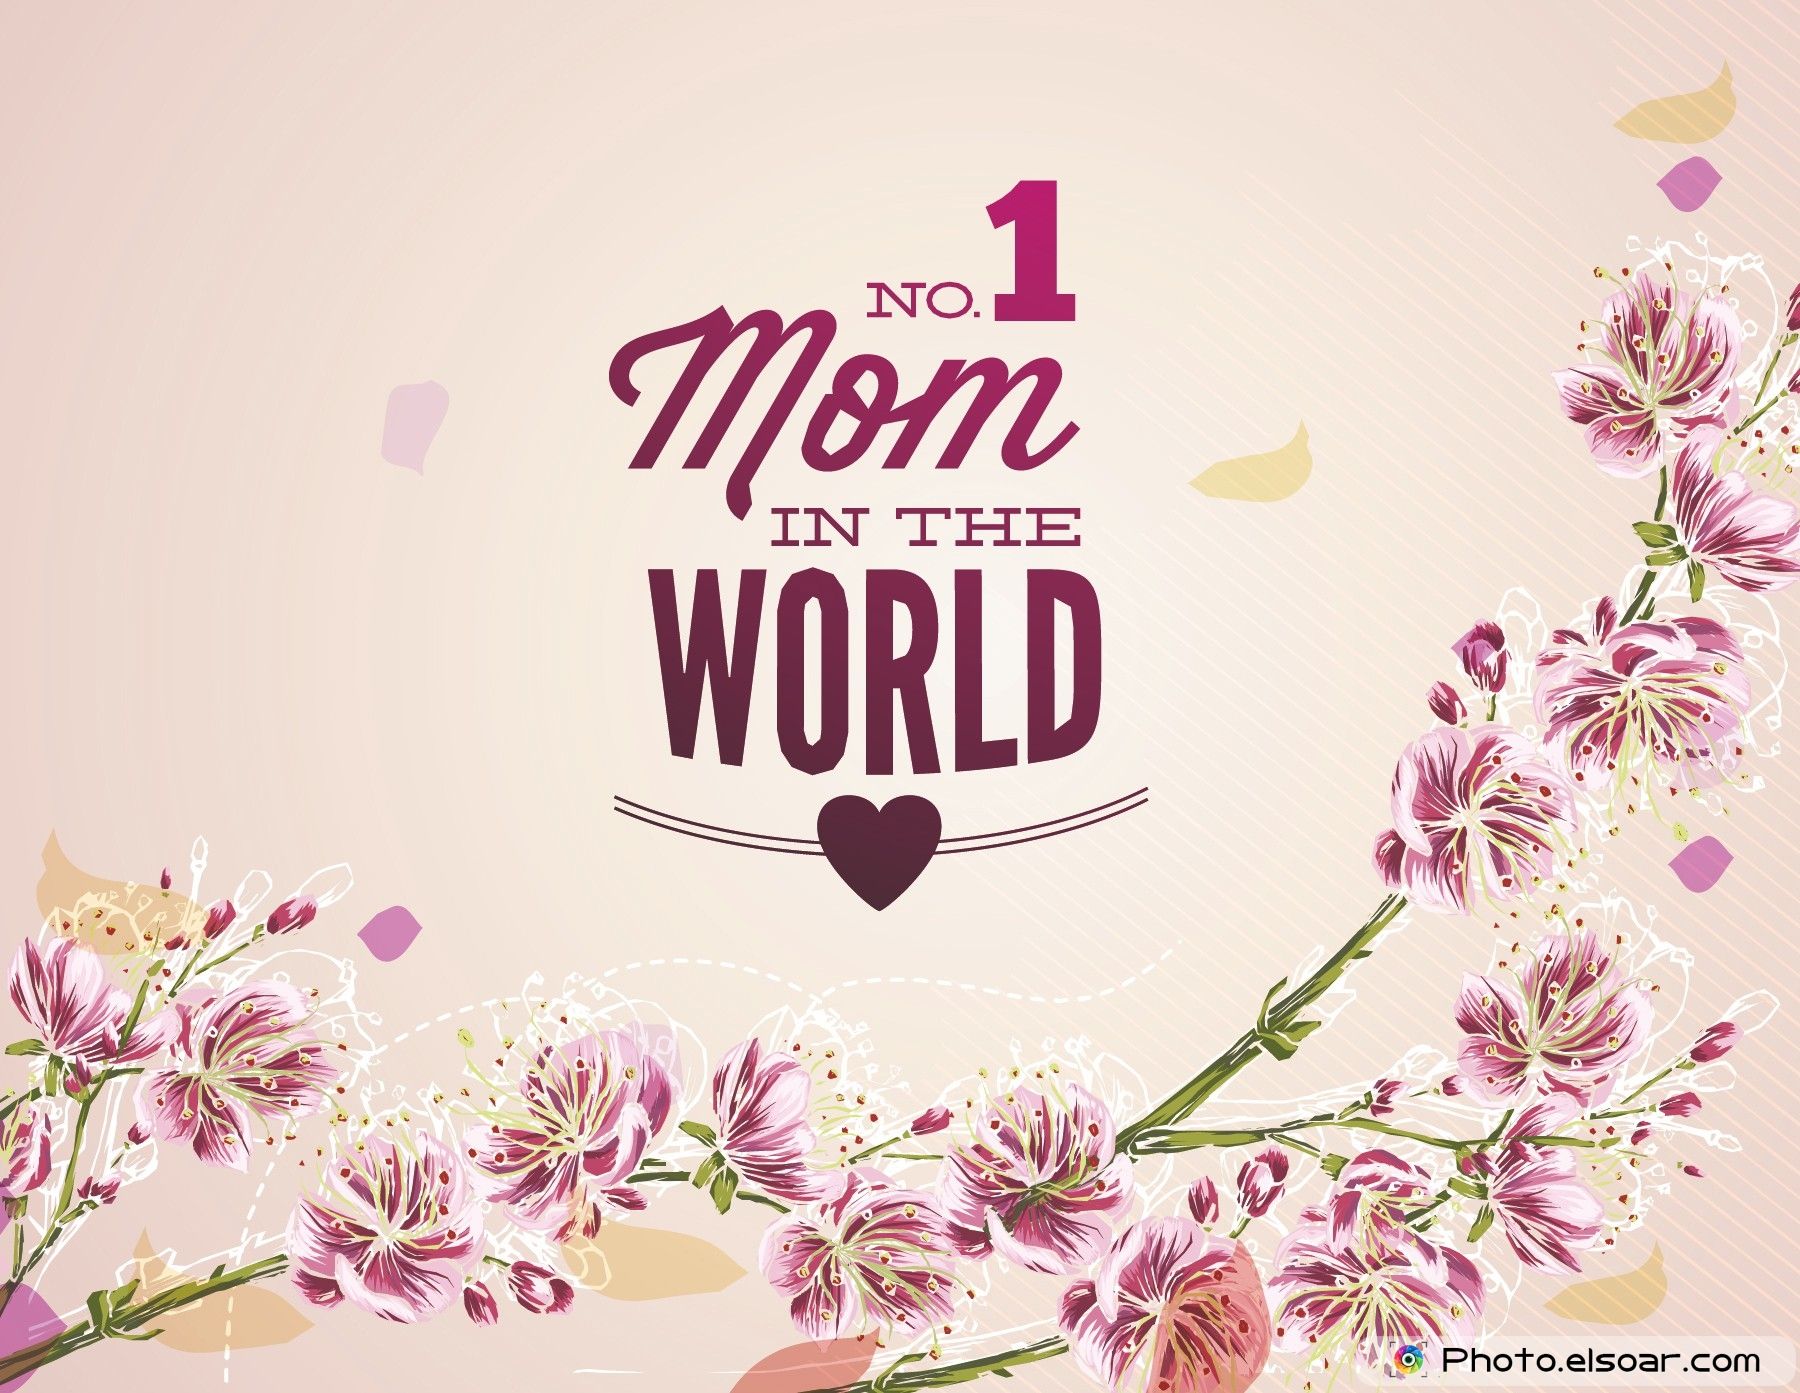 Mom In The World Over Amazing Background 1 Mom In The World HD Wallpaper